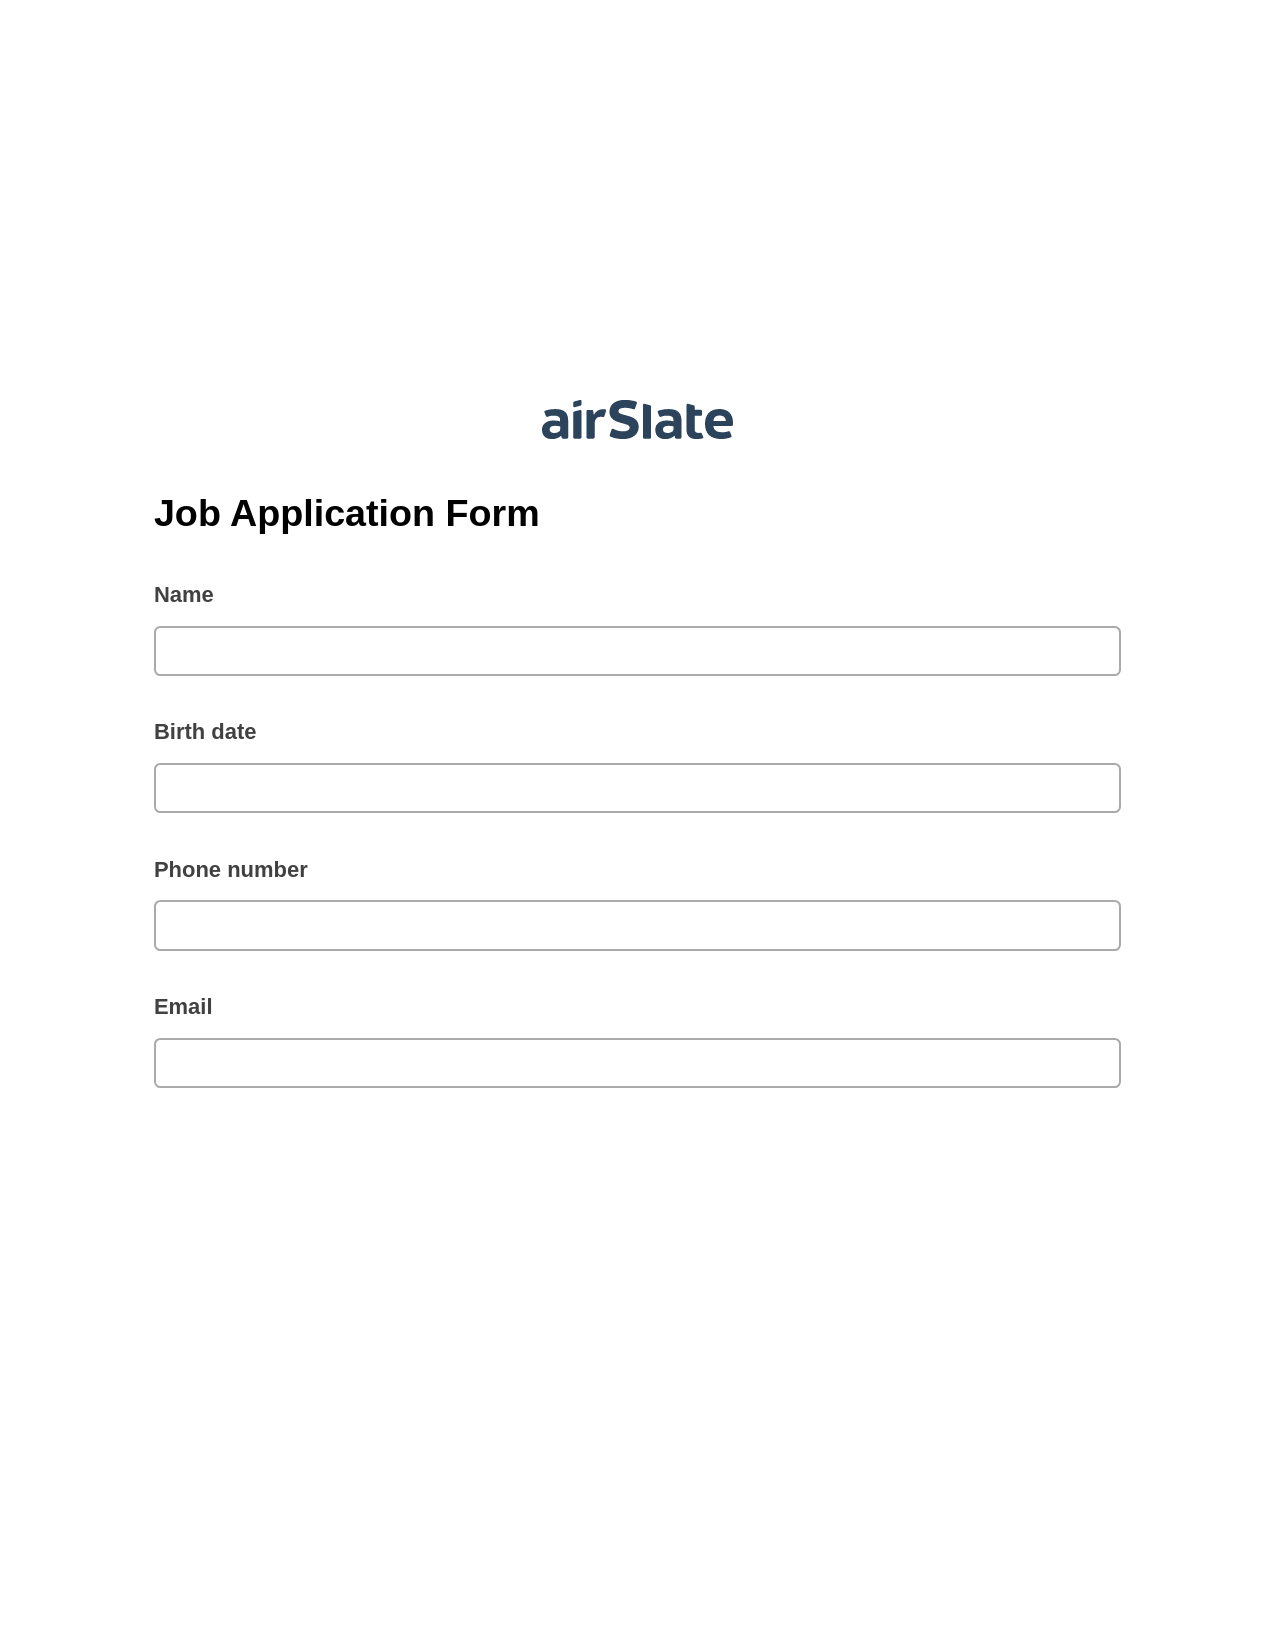 Job Application Form Pre-fill from Smartsheet Bot, Audit Trail Bot, Export to Excel 365 Bot